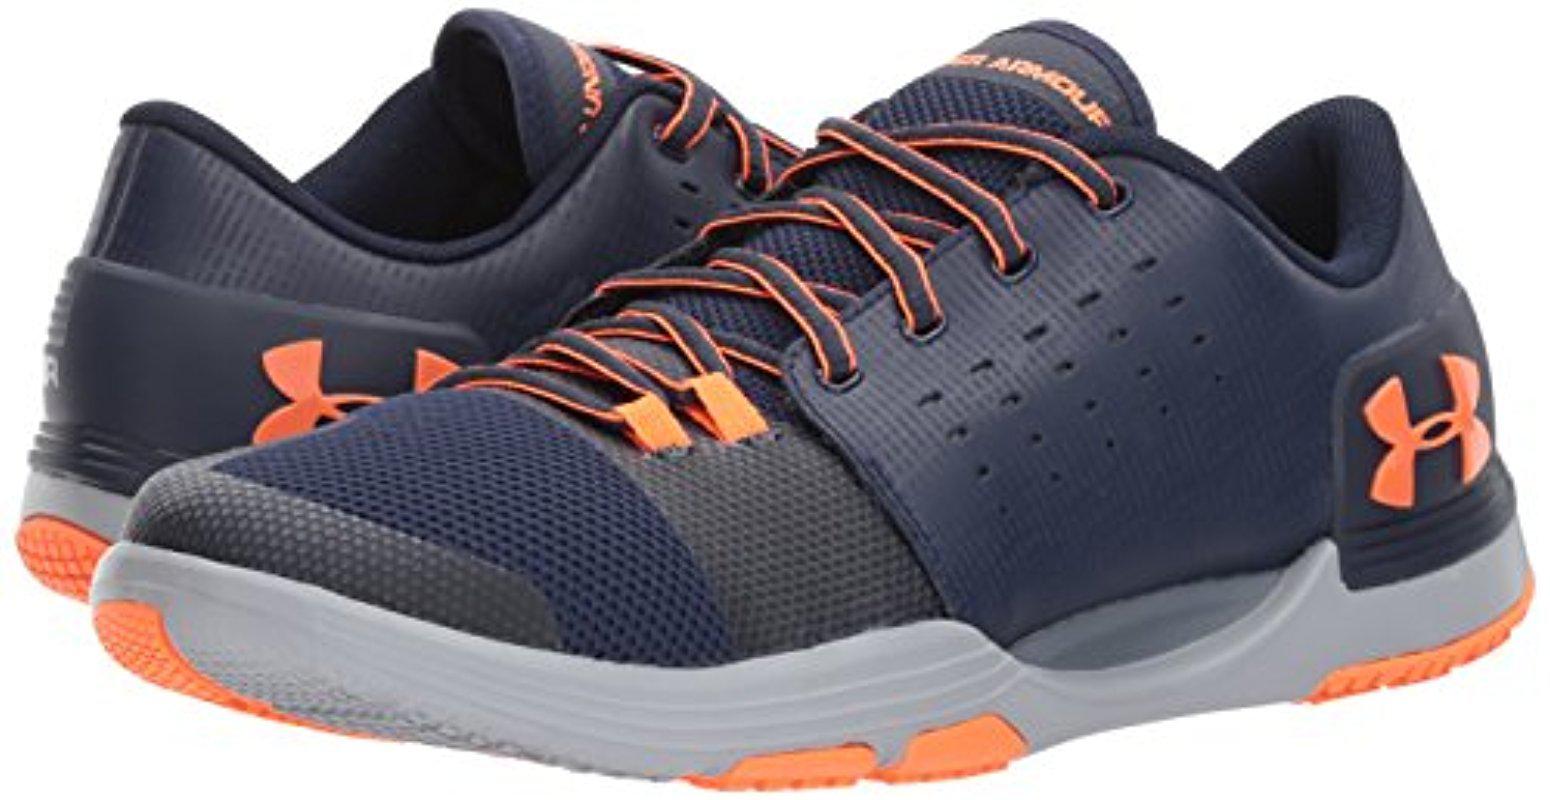 Under Armour Mens Limitless 3 Sneaker